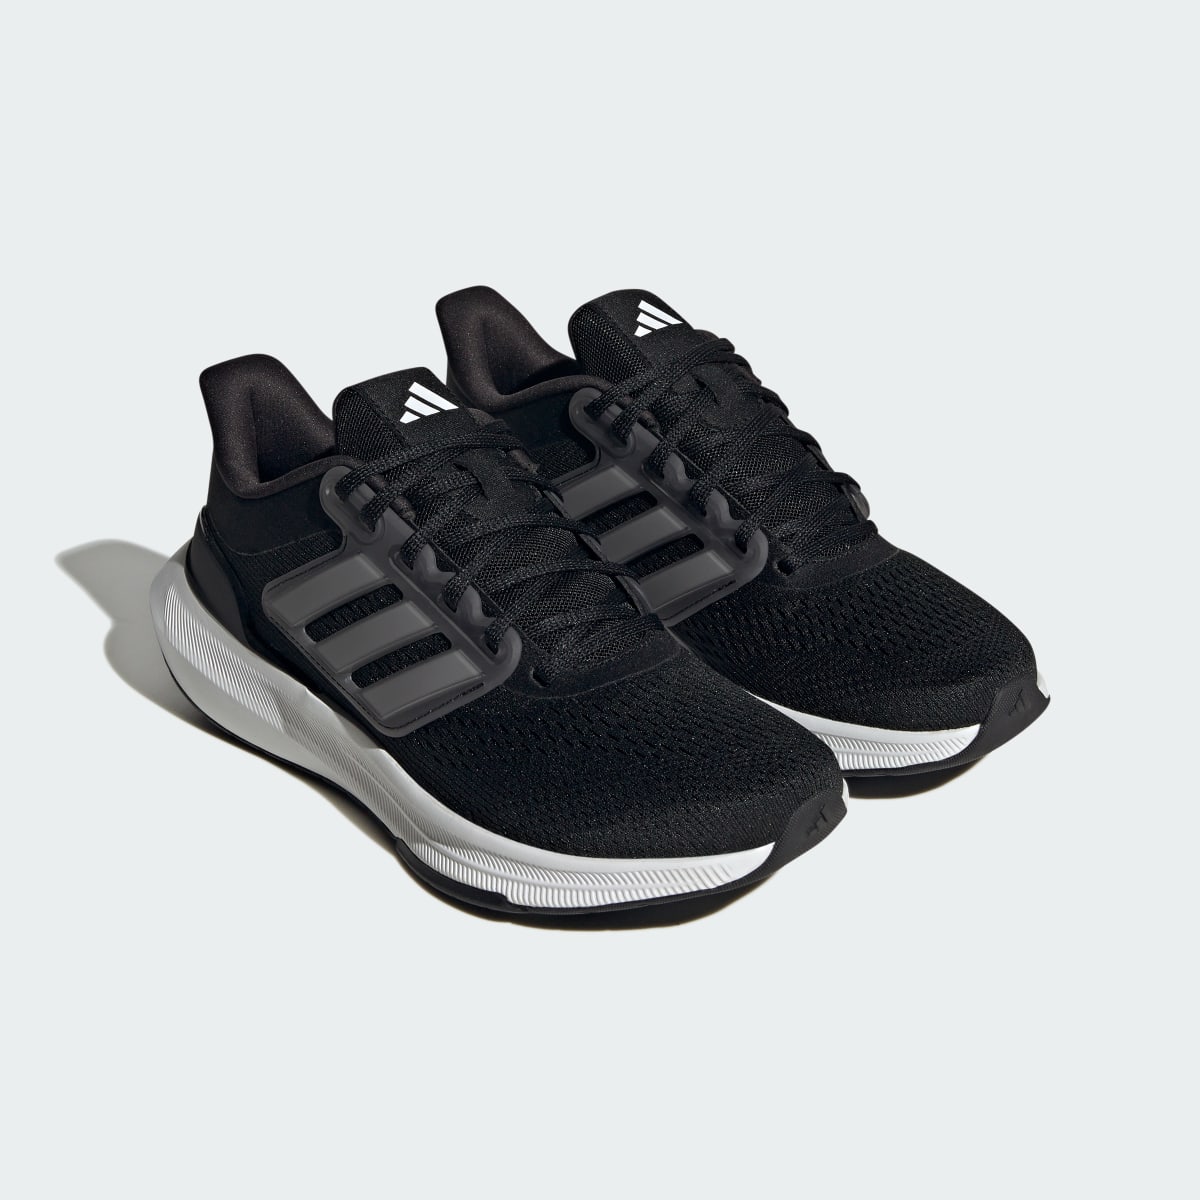 Adidas Ultrabounce Wide Running Shoes. 7